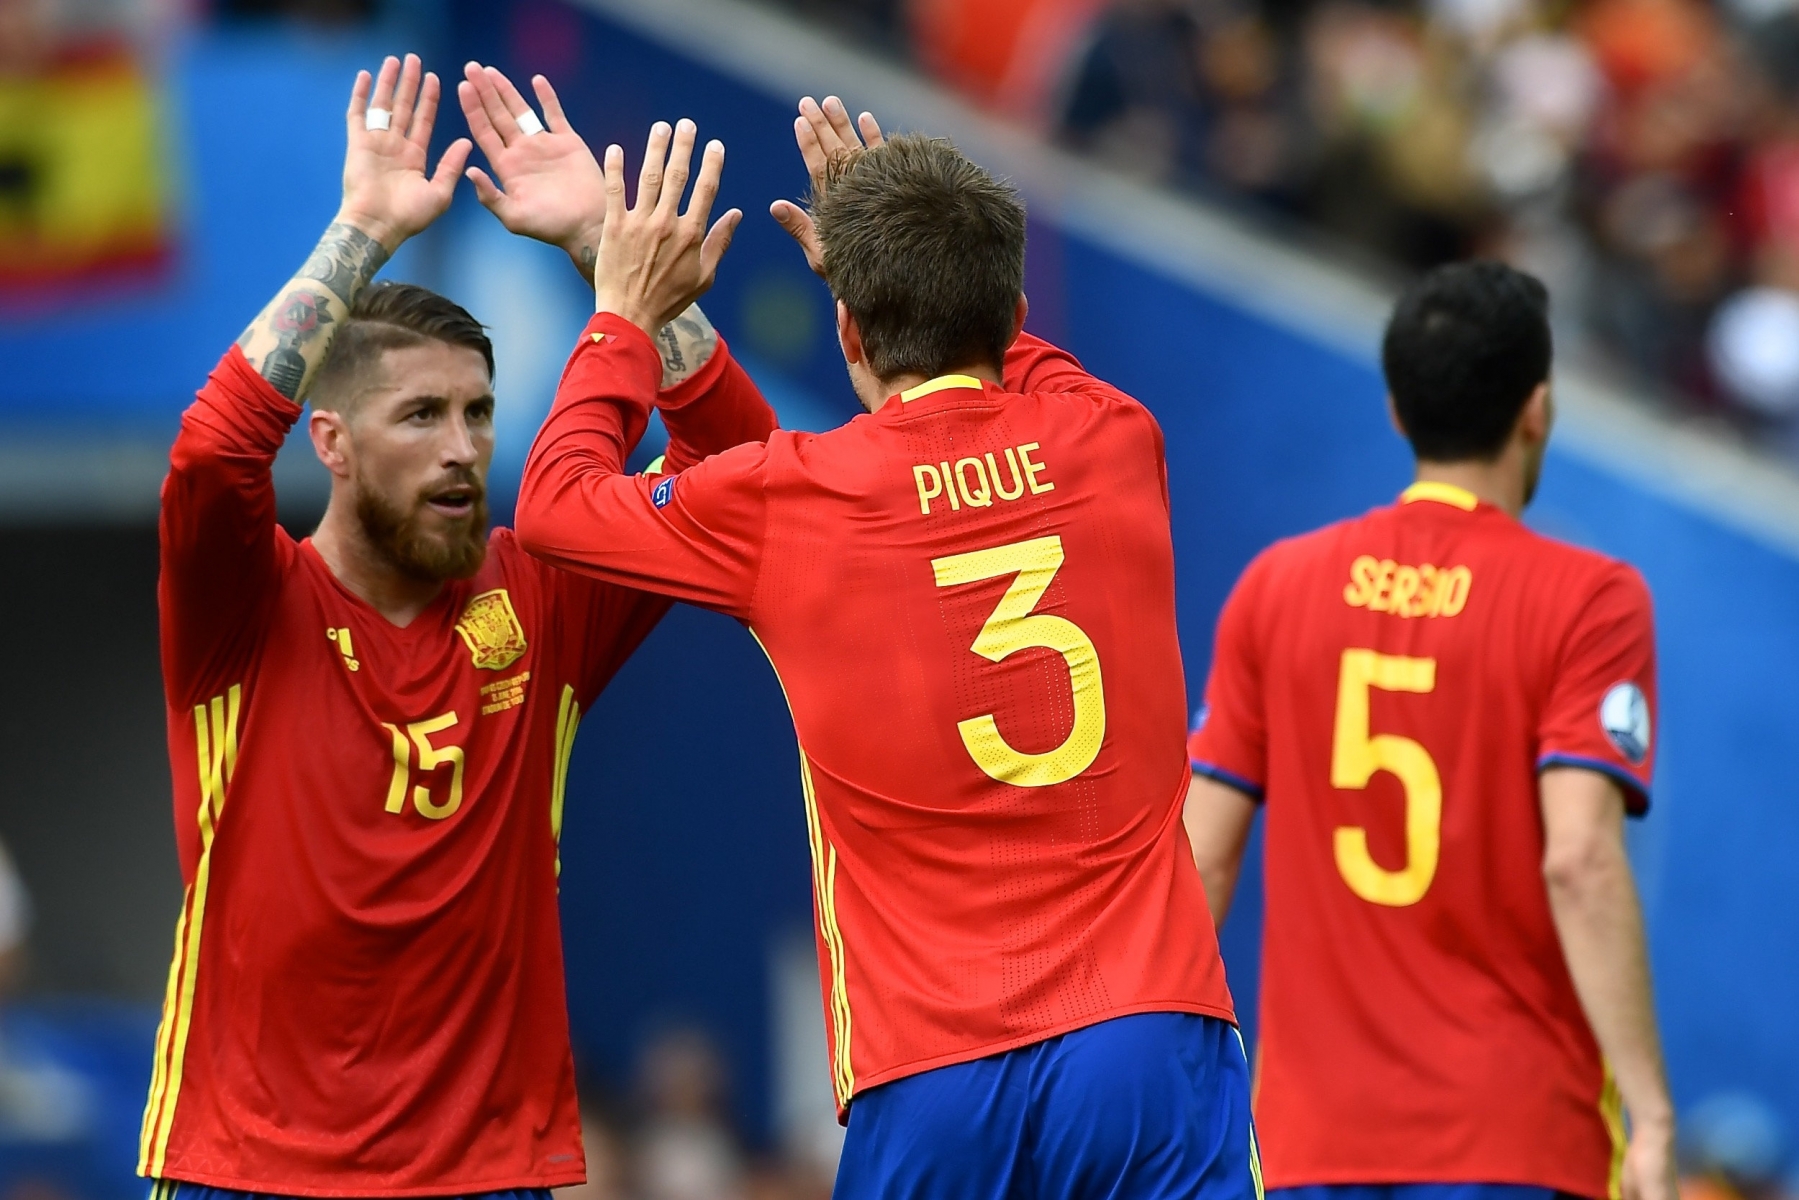 13.06.2016, Stadium Municipal, Toulouse, FRA, UEFA Euro, Frankreich, Spanien vs Tschechien, Gruppe D, im Bild Gerard Piqué of Spain (2nd left) celebrates with Sergio Ramos after scoring their first goal // Gerard Piqué of Spain (2nd left) celebrates with Sergio Ramos after scoring their first goal during Group D match between Spain and Czech Republic of the UEFA EURO 2016 France at the Stadium Municipal in Toulouse, France on 2016/06/13. EXPA Pictures © 2016, PhotoCredit: EXPA/ Focus Images/ Kristian Kane *****ATTENTION - for AUT, GER, FRA, ITA, SUI, POL, CRO, SLO only***** (KEYSTONE/APA/Focus Images)RAMOS FUSSBALL EM 2016 VORRUNDE ESP CZE